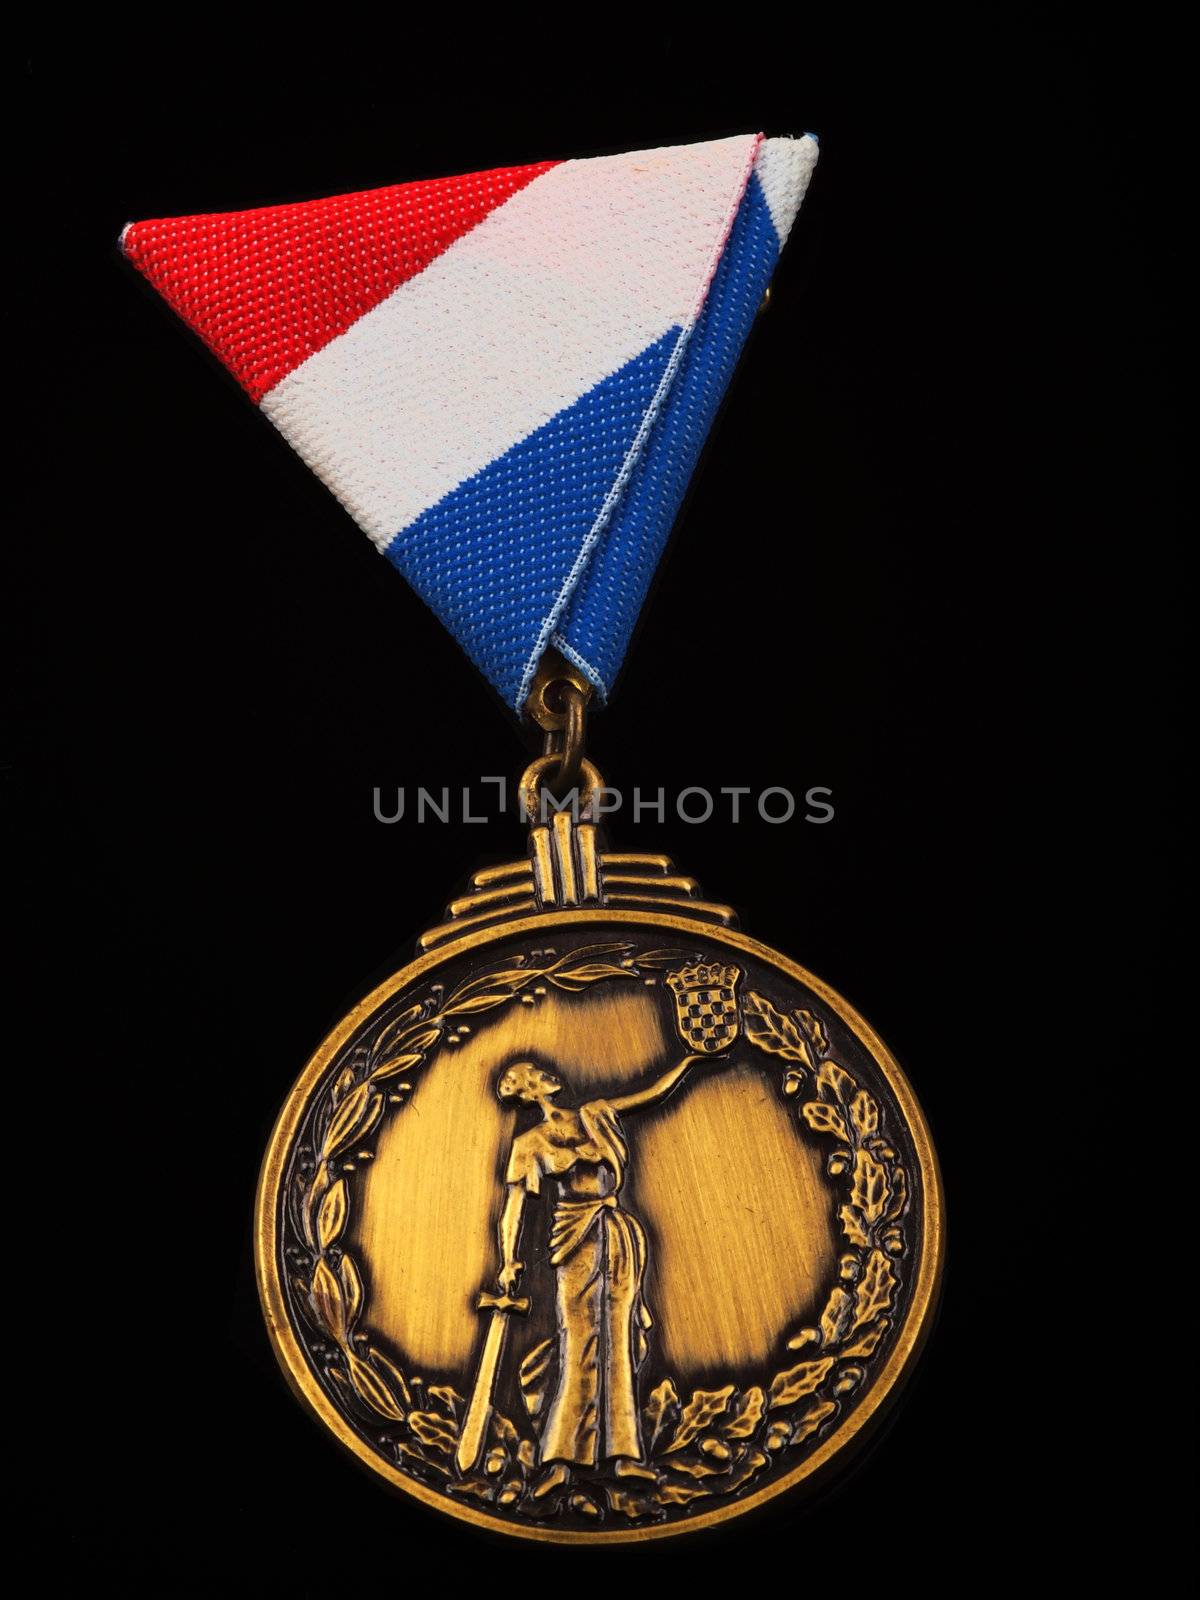 bronze medal for war heroes,isolated on black background        